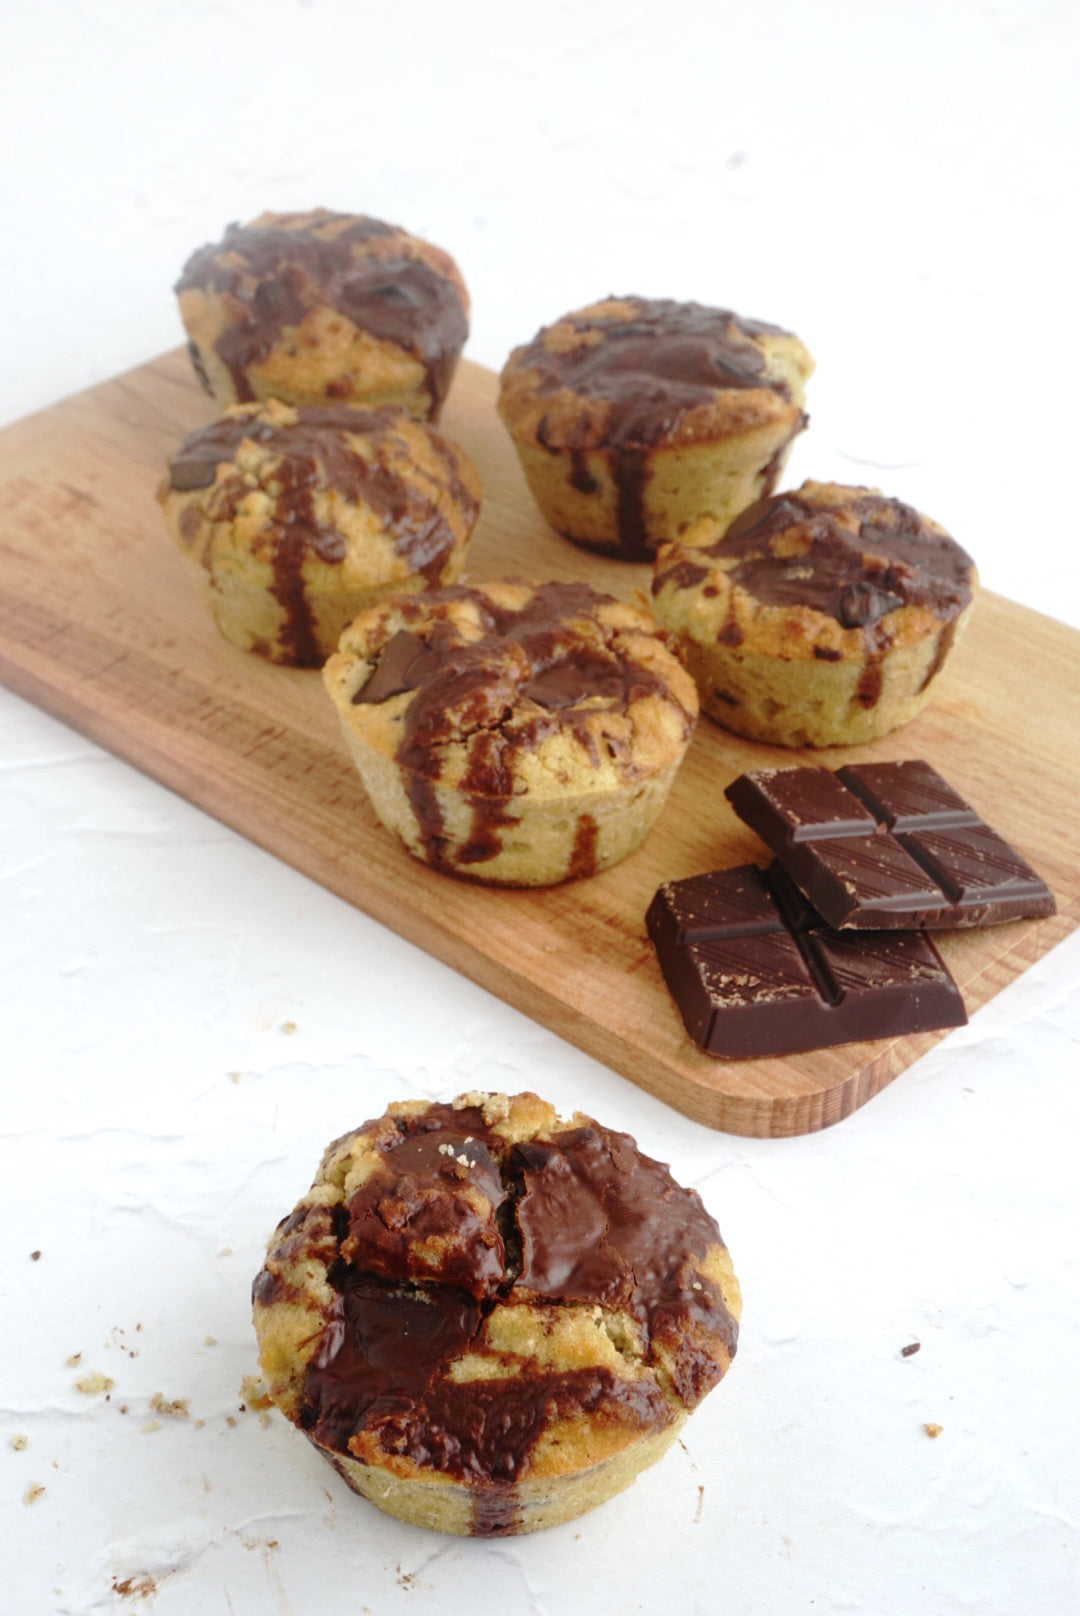 Chocolate muffins which are 100% keto friendly and made with OKONO chocolate